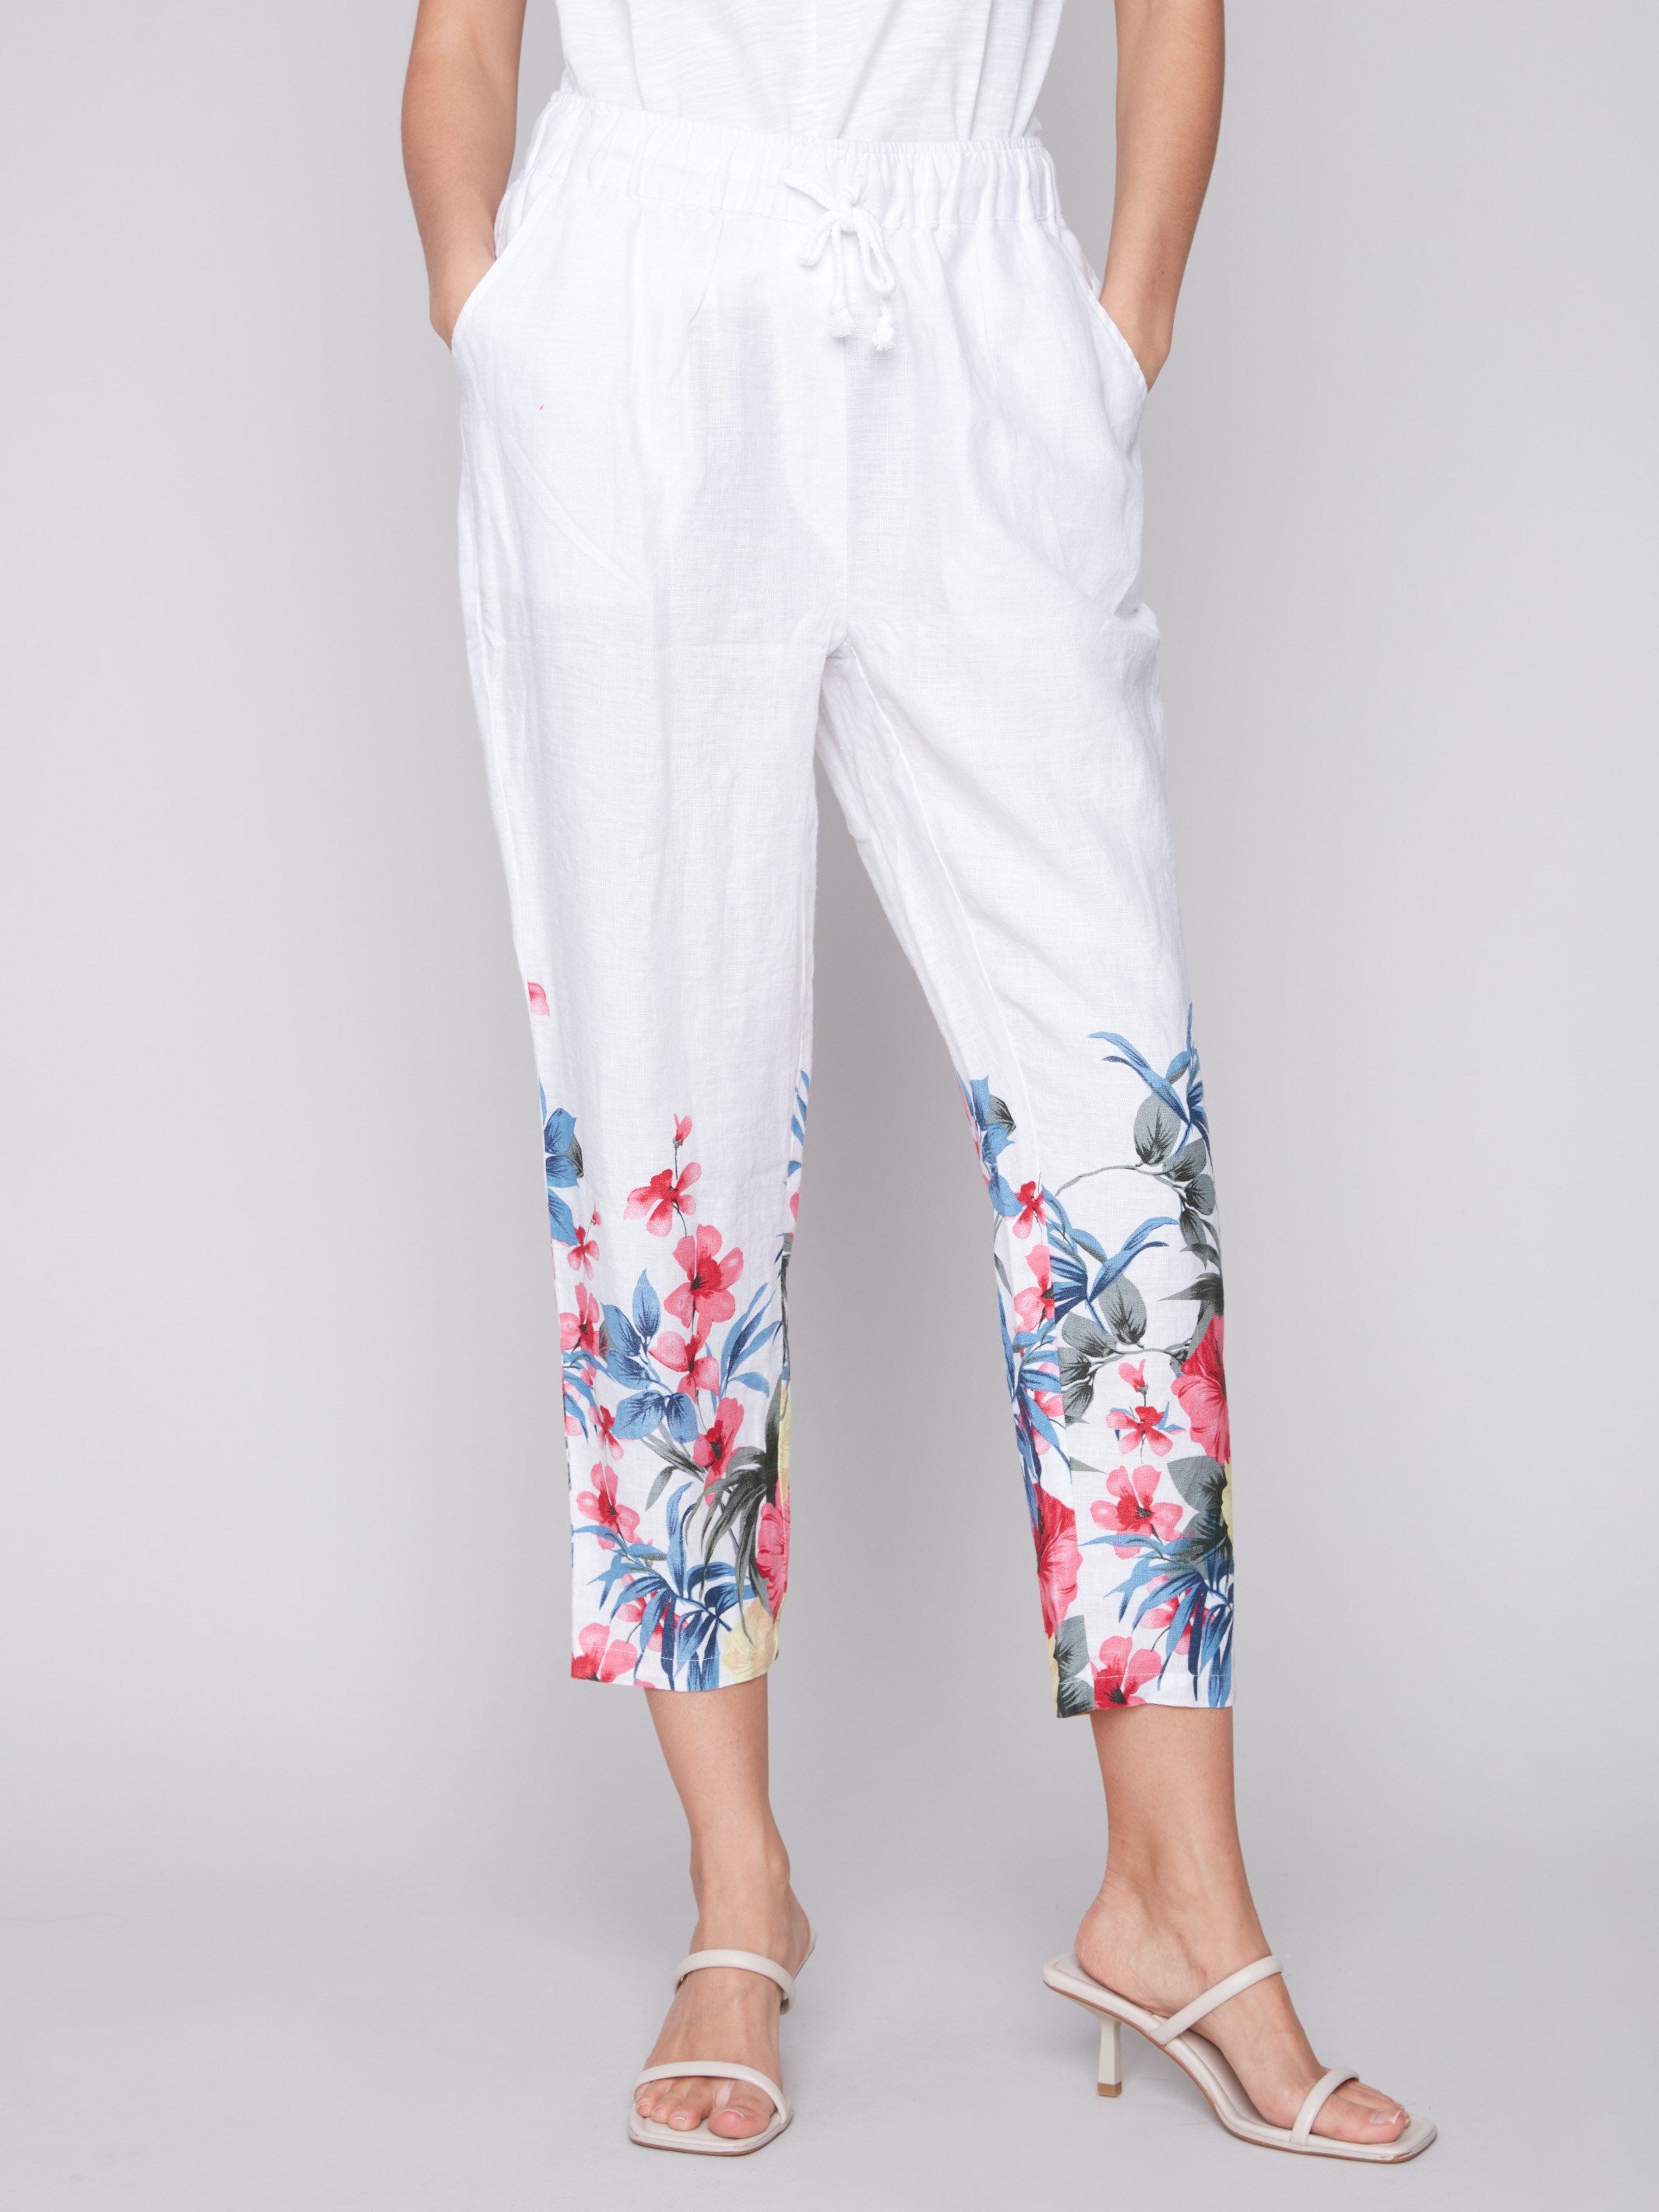 Printed Linen Pull-On Pants - Maui - Charlie B Collection Canada - Image 2